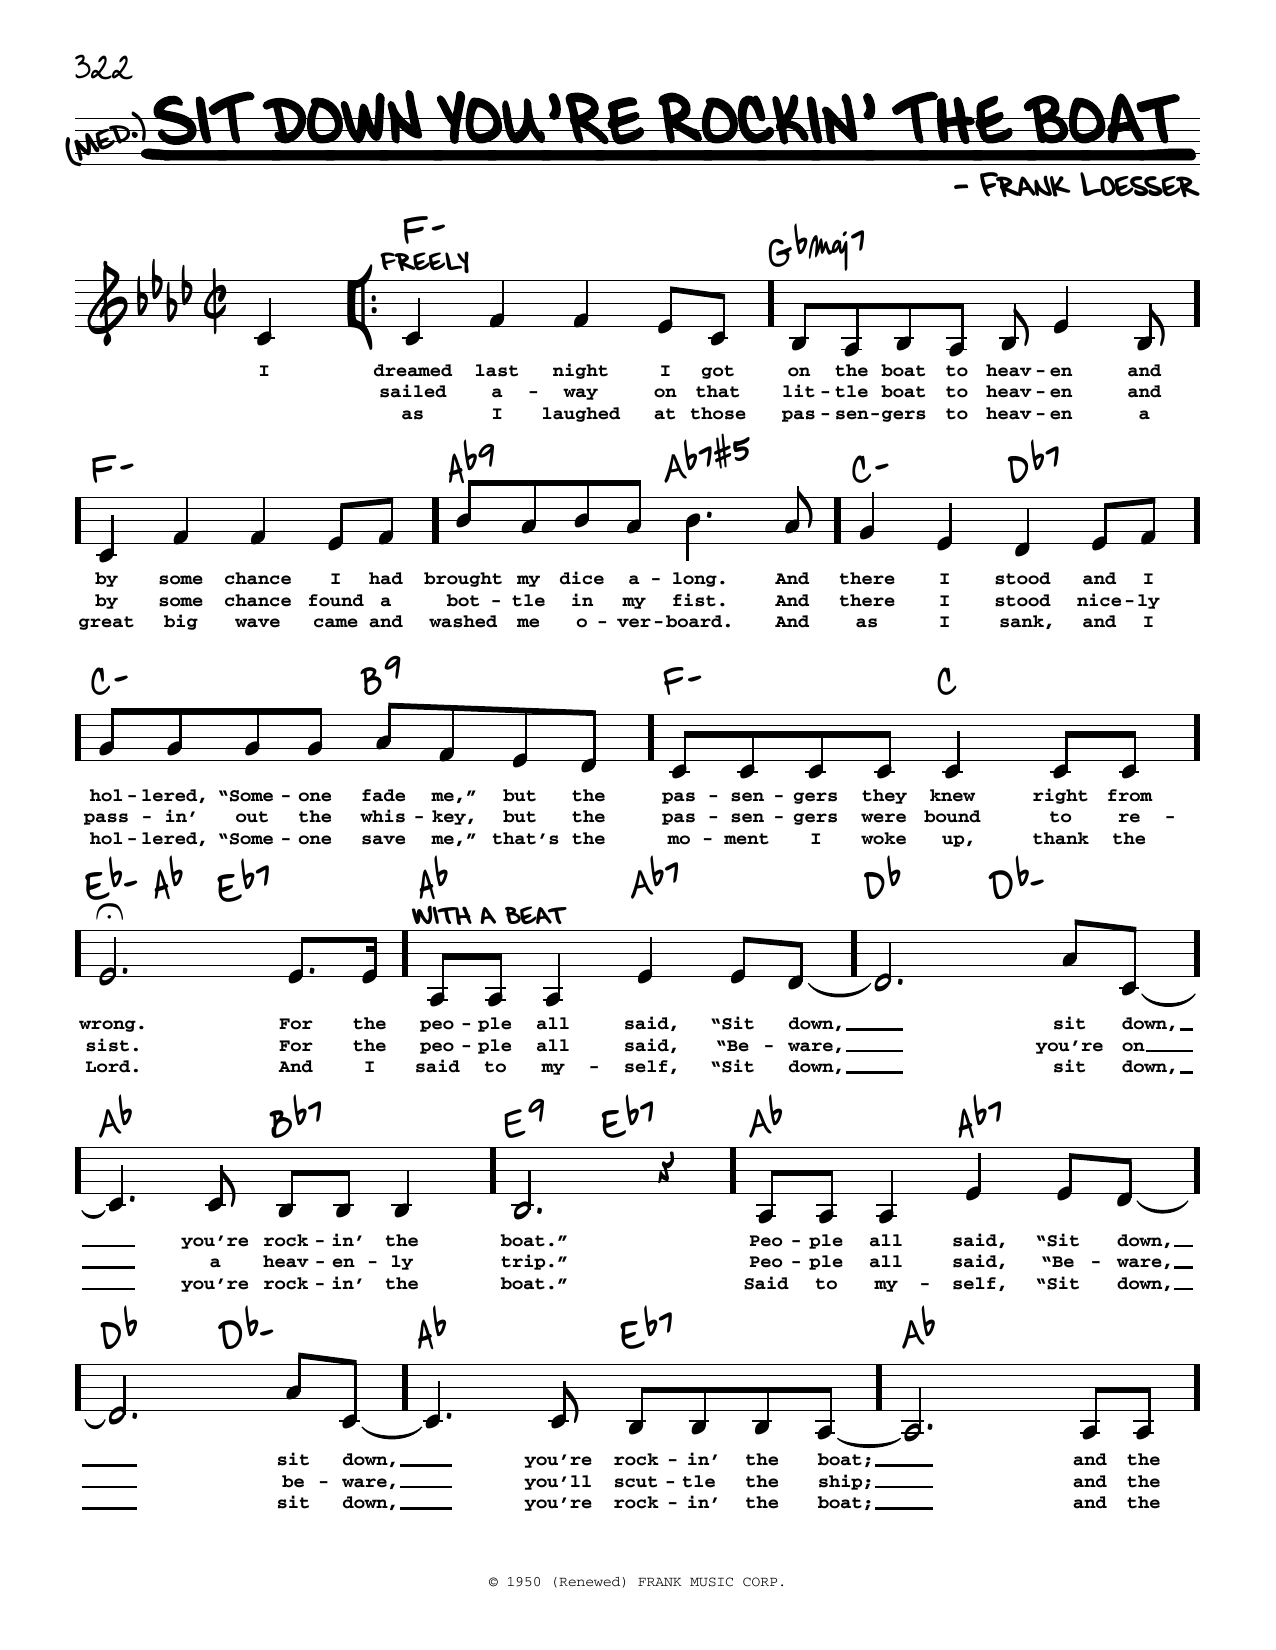 Frank Loesser Sit Down You're Rockin' The Boat (Low Voice) sheet music notes printable PDF score